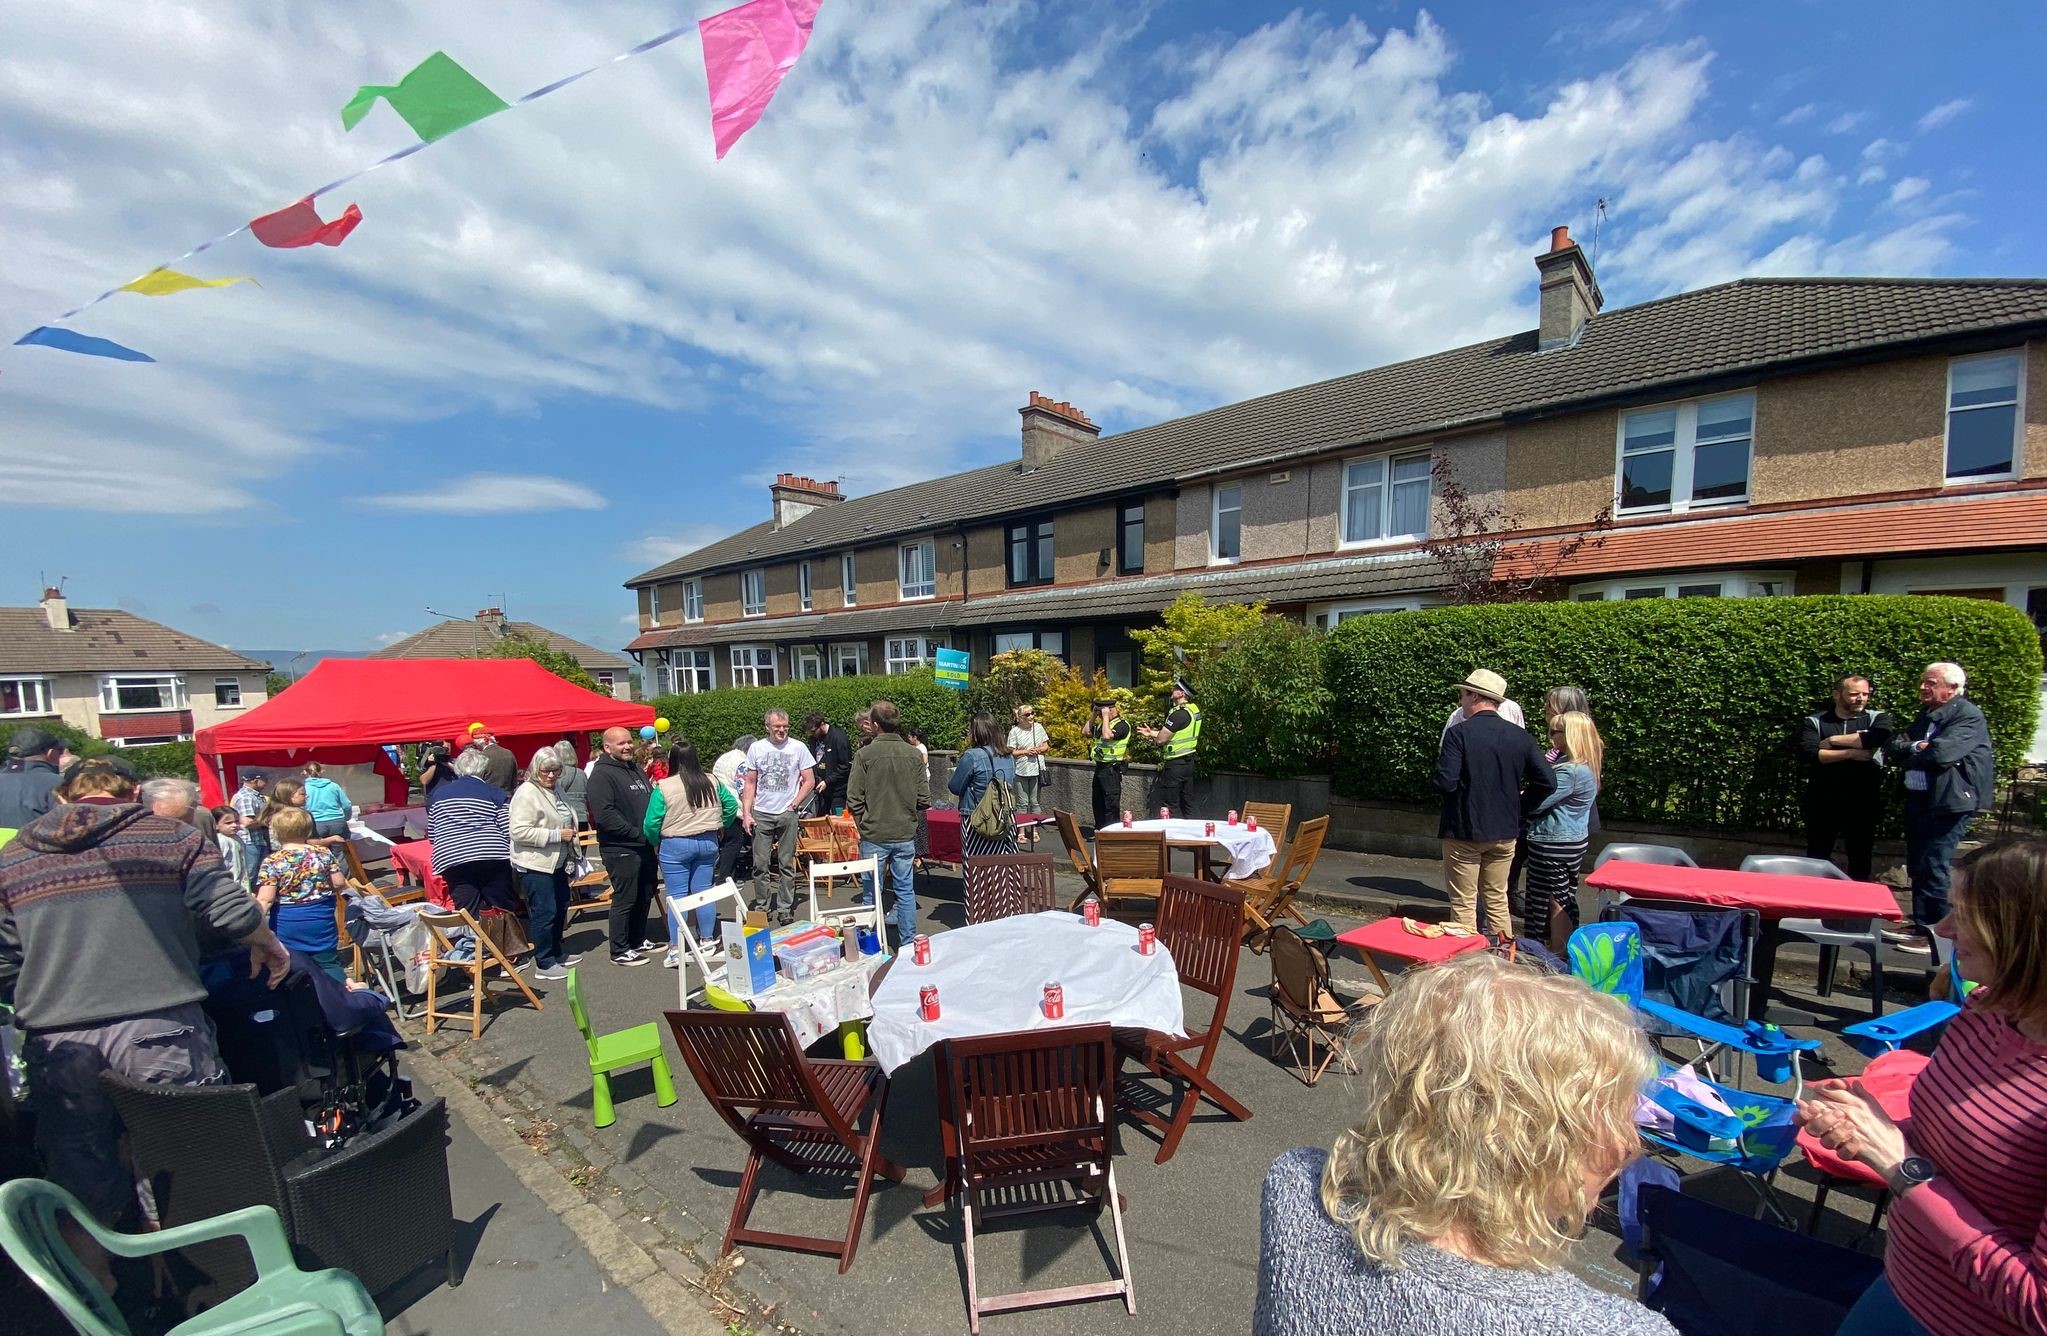 Street party under way to celebrate the Platinum Jubilee